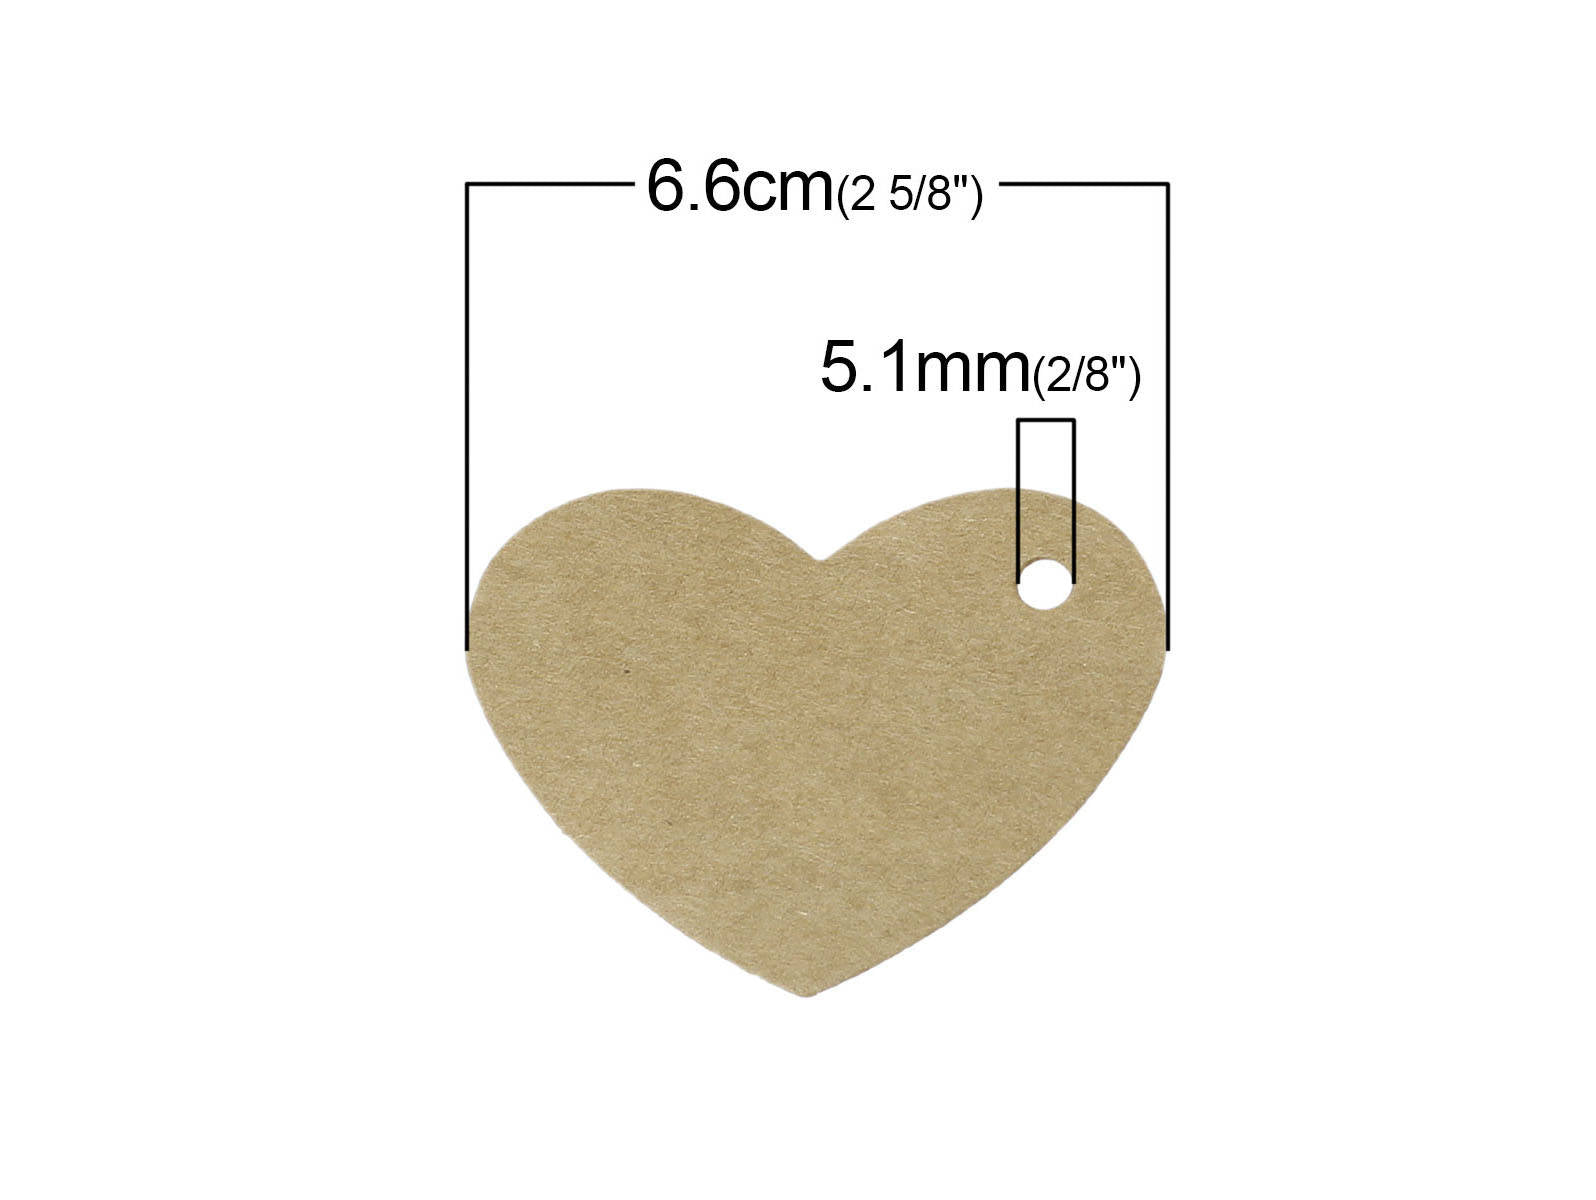 Heart gift tags - blank kraft paper tags - Set of 10 or 50